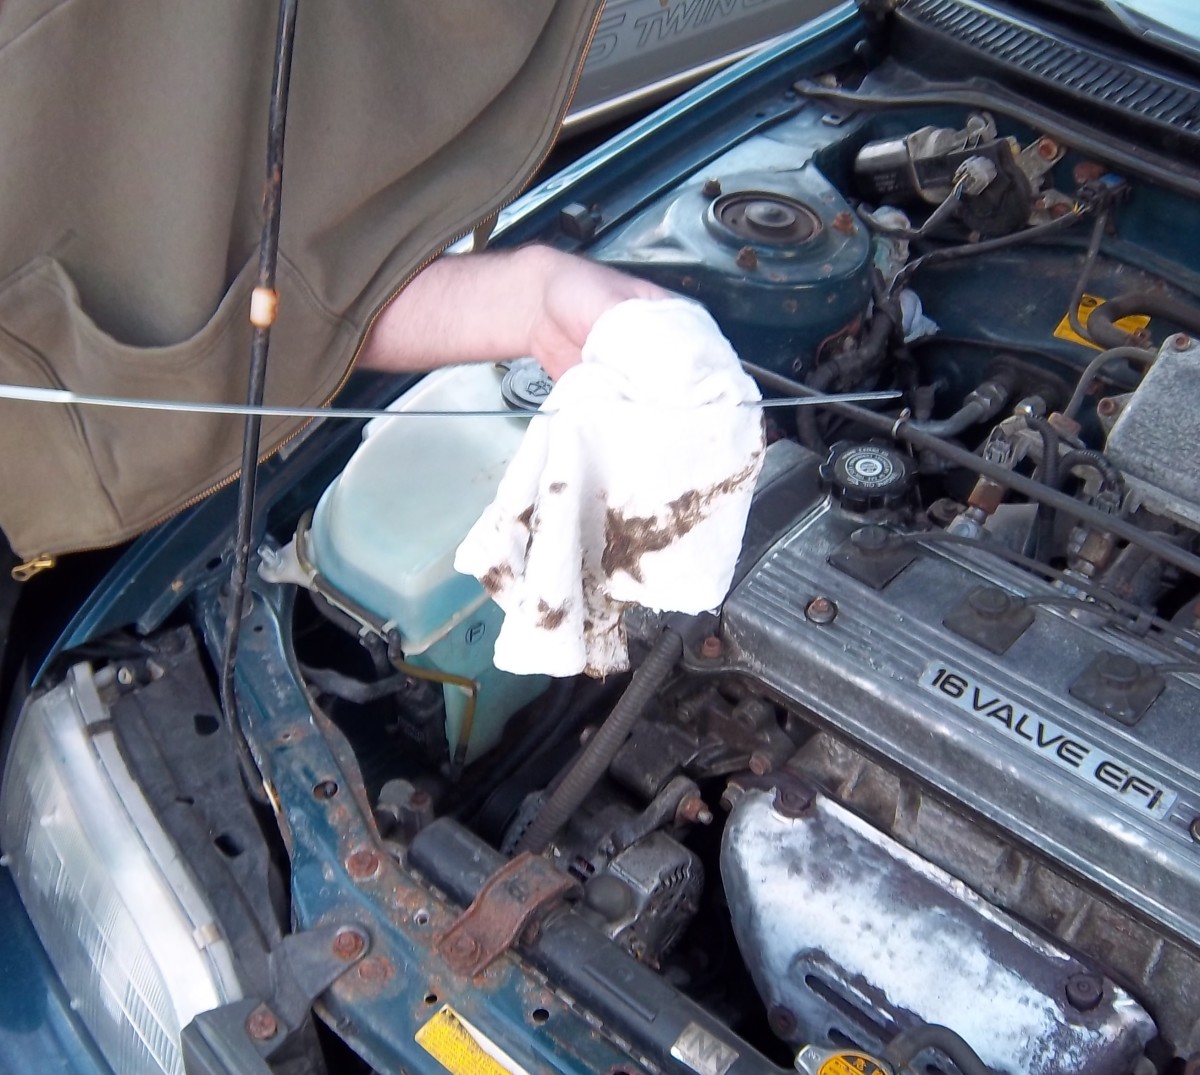 Use a rag to wipe the oil off. Place the dipstick all the way back in. Then pull out again to get an accurate reading.